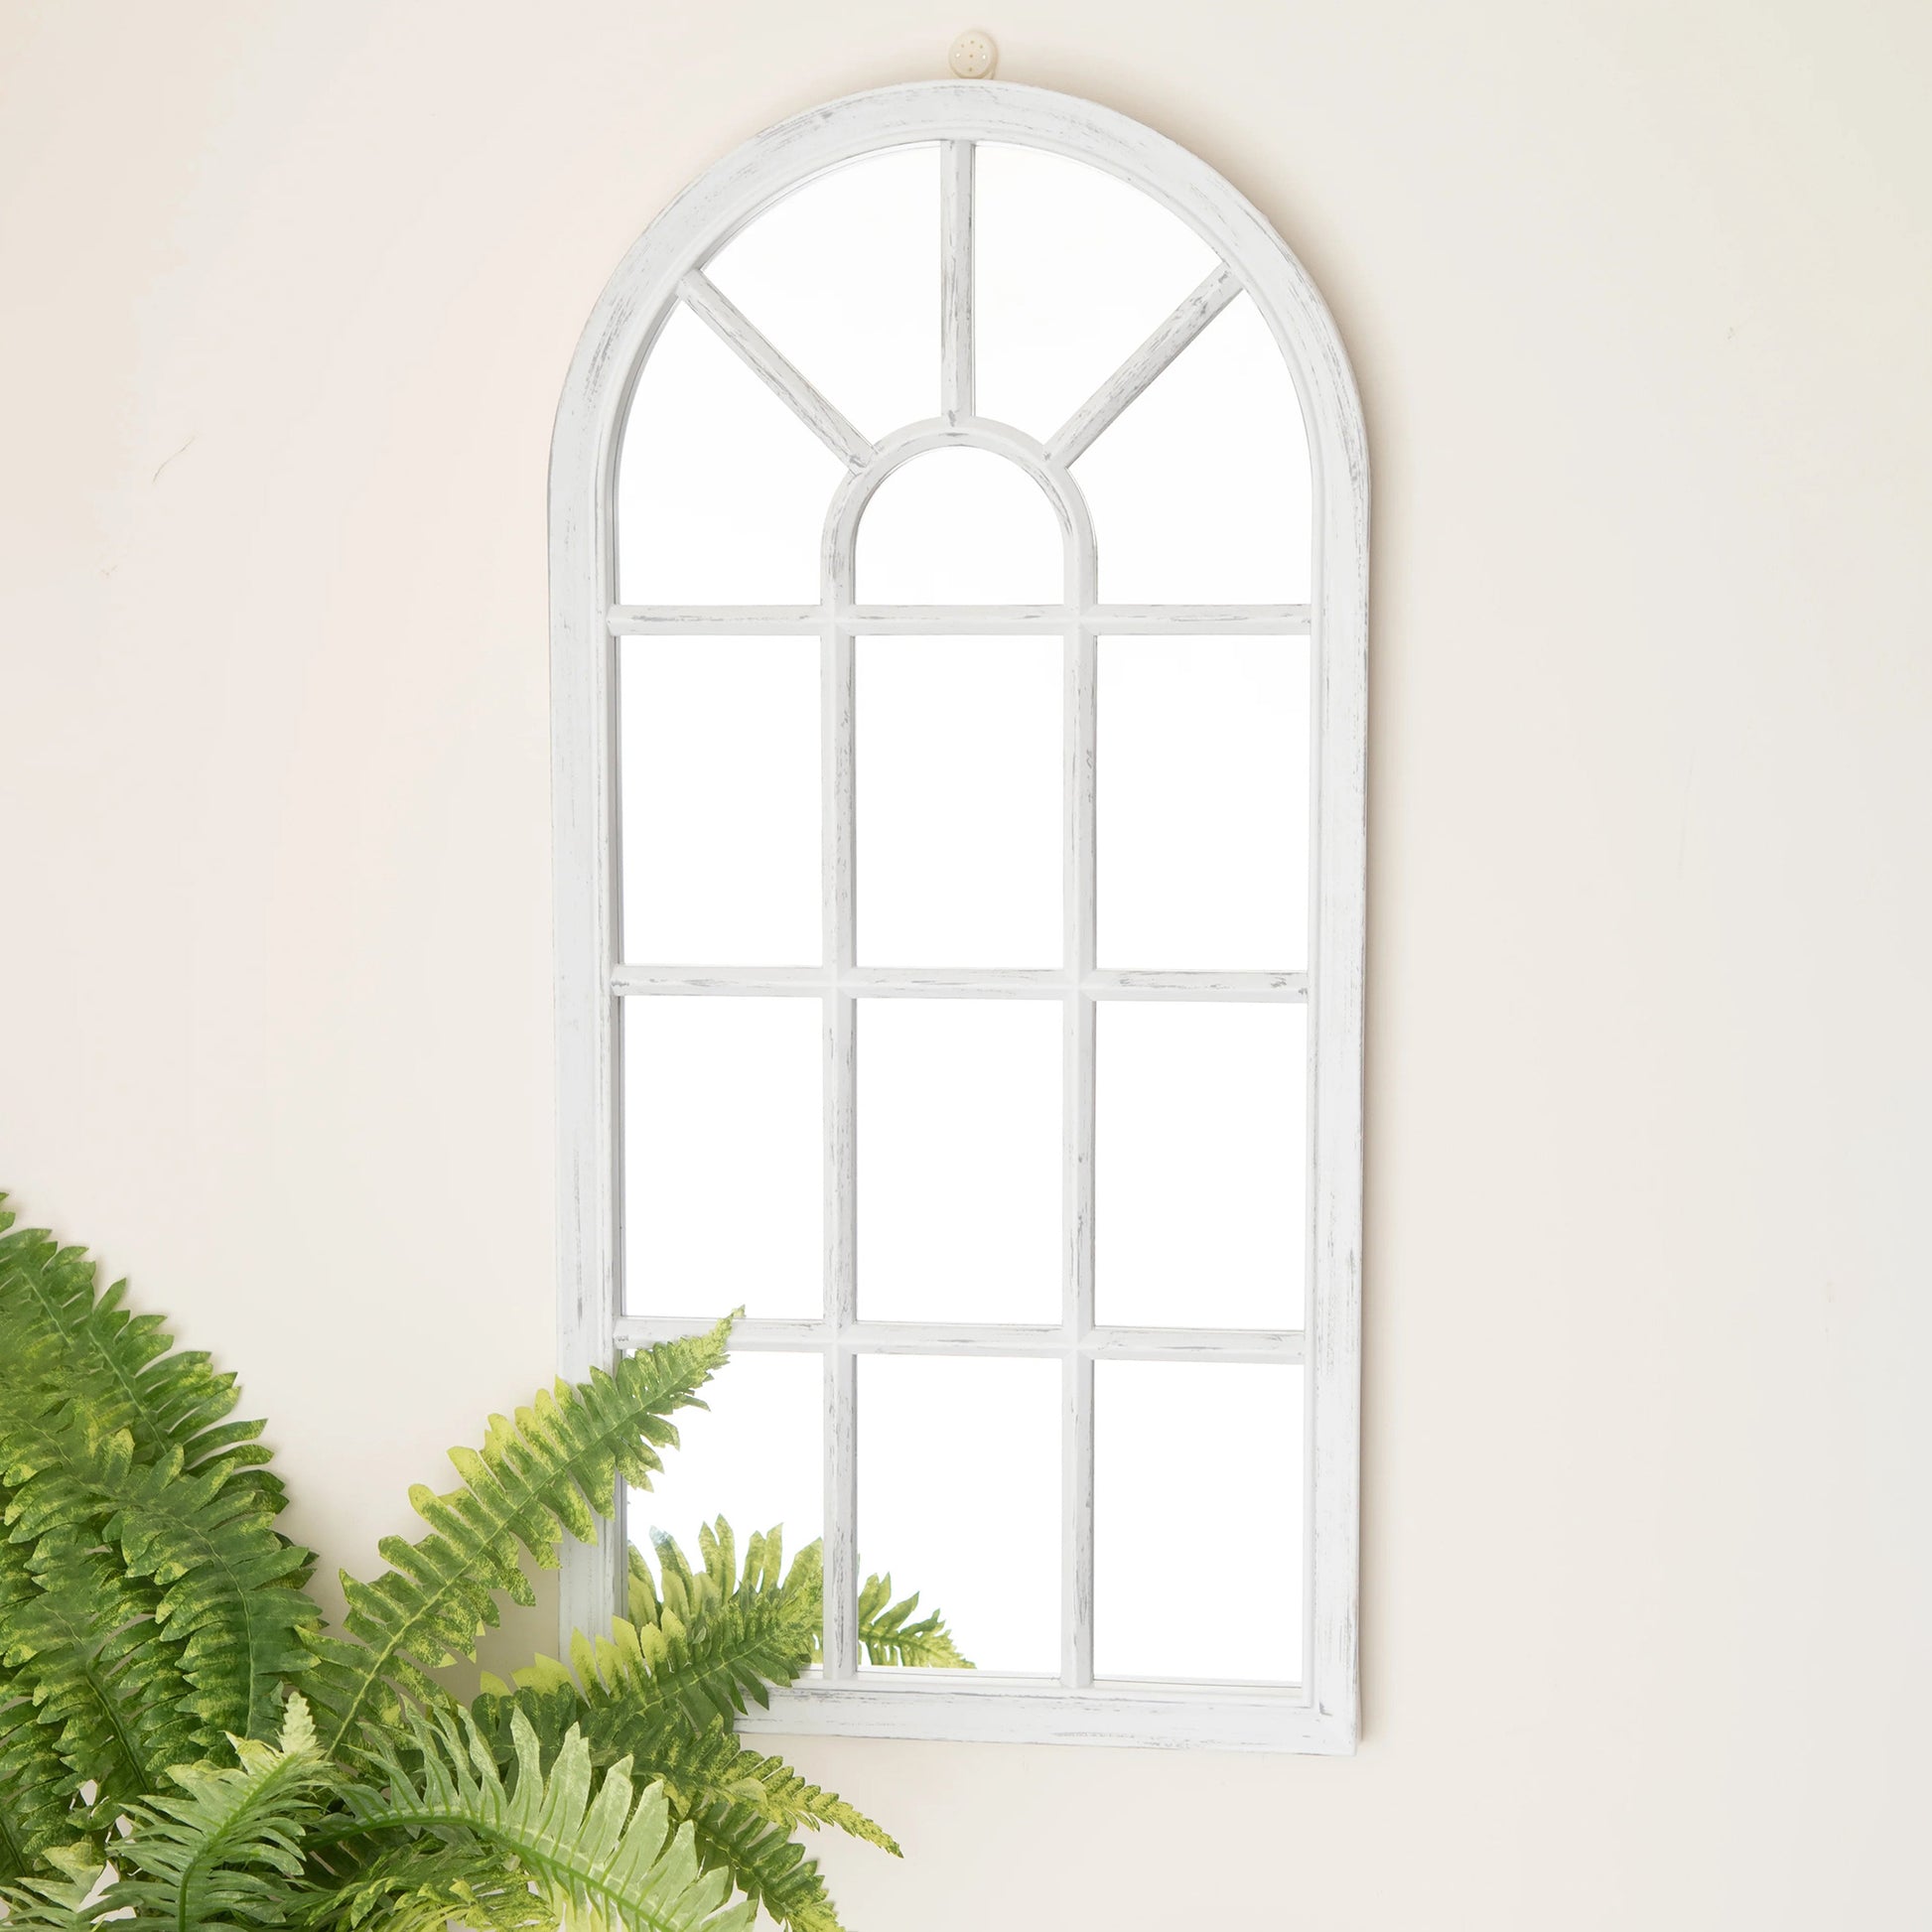 Large Arched Garden Wall Mirror - Modena White